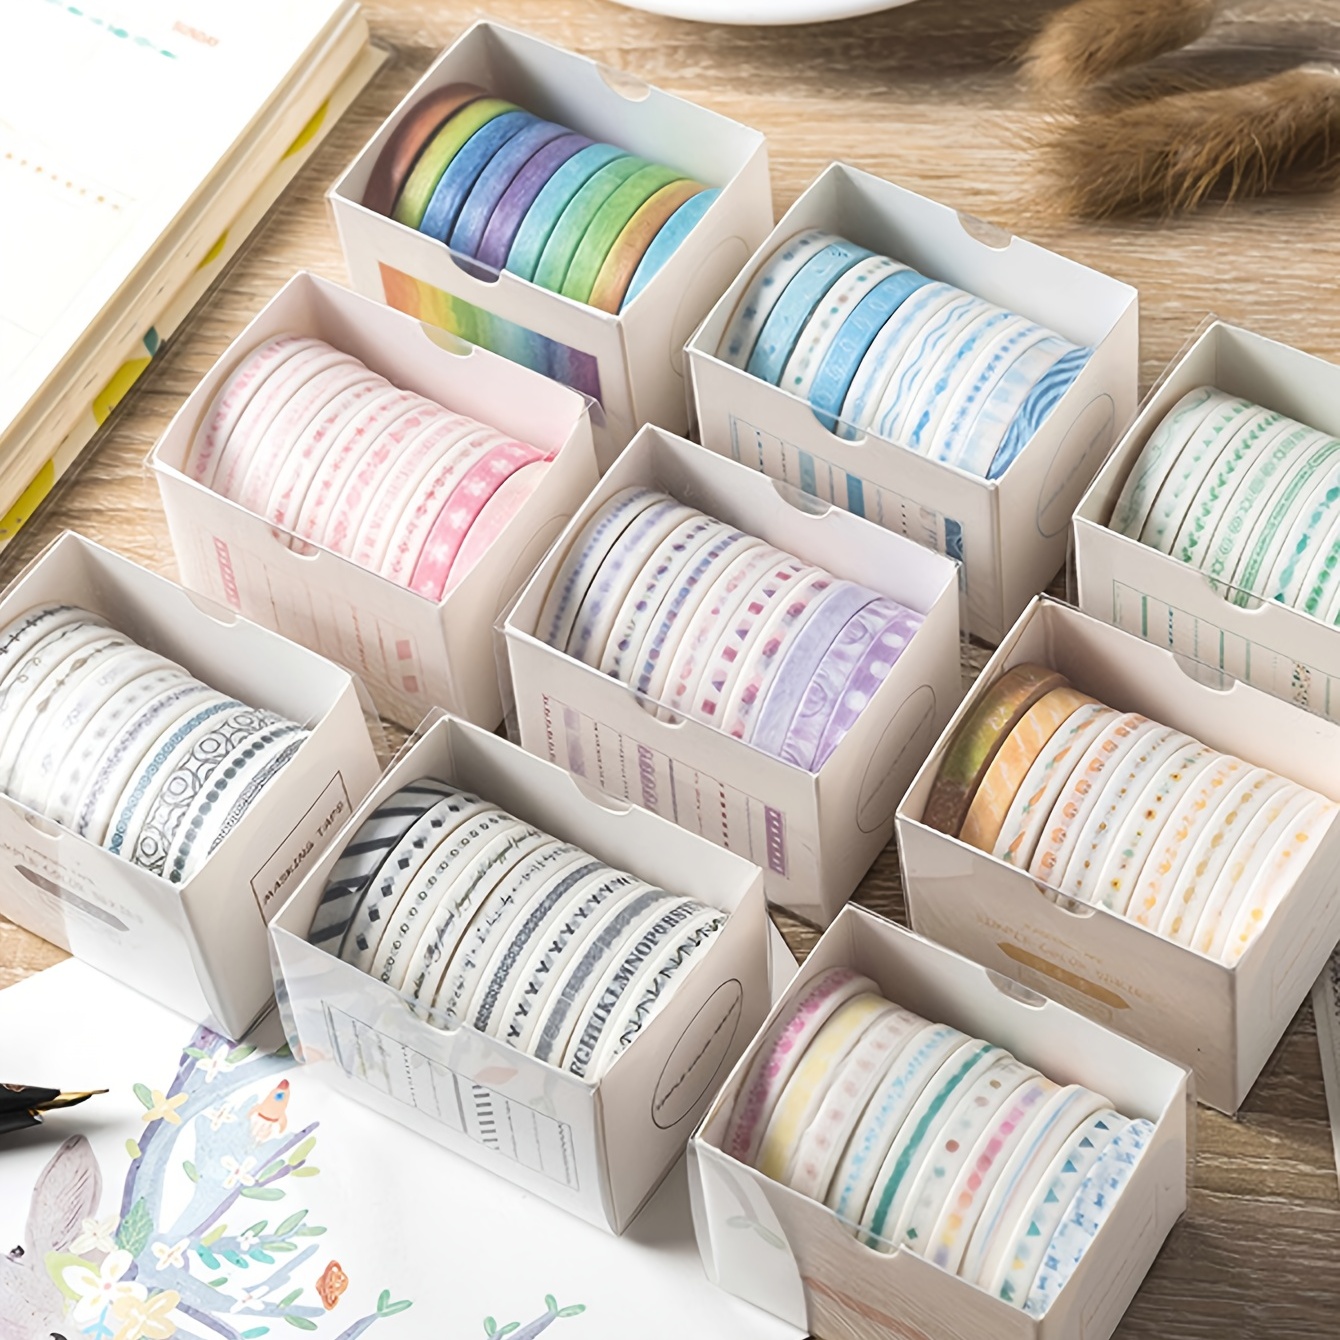 Washi Tape Set - 16 Rolls of 15 mm Wide Decorative Colored Tape for  Scrapbooking, Bullet Journals, Planners, DIY Decor & Craft Supplies